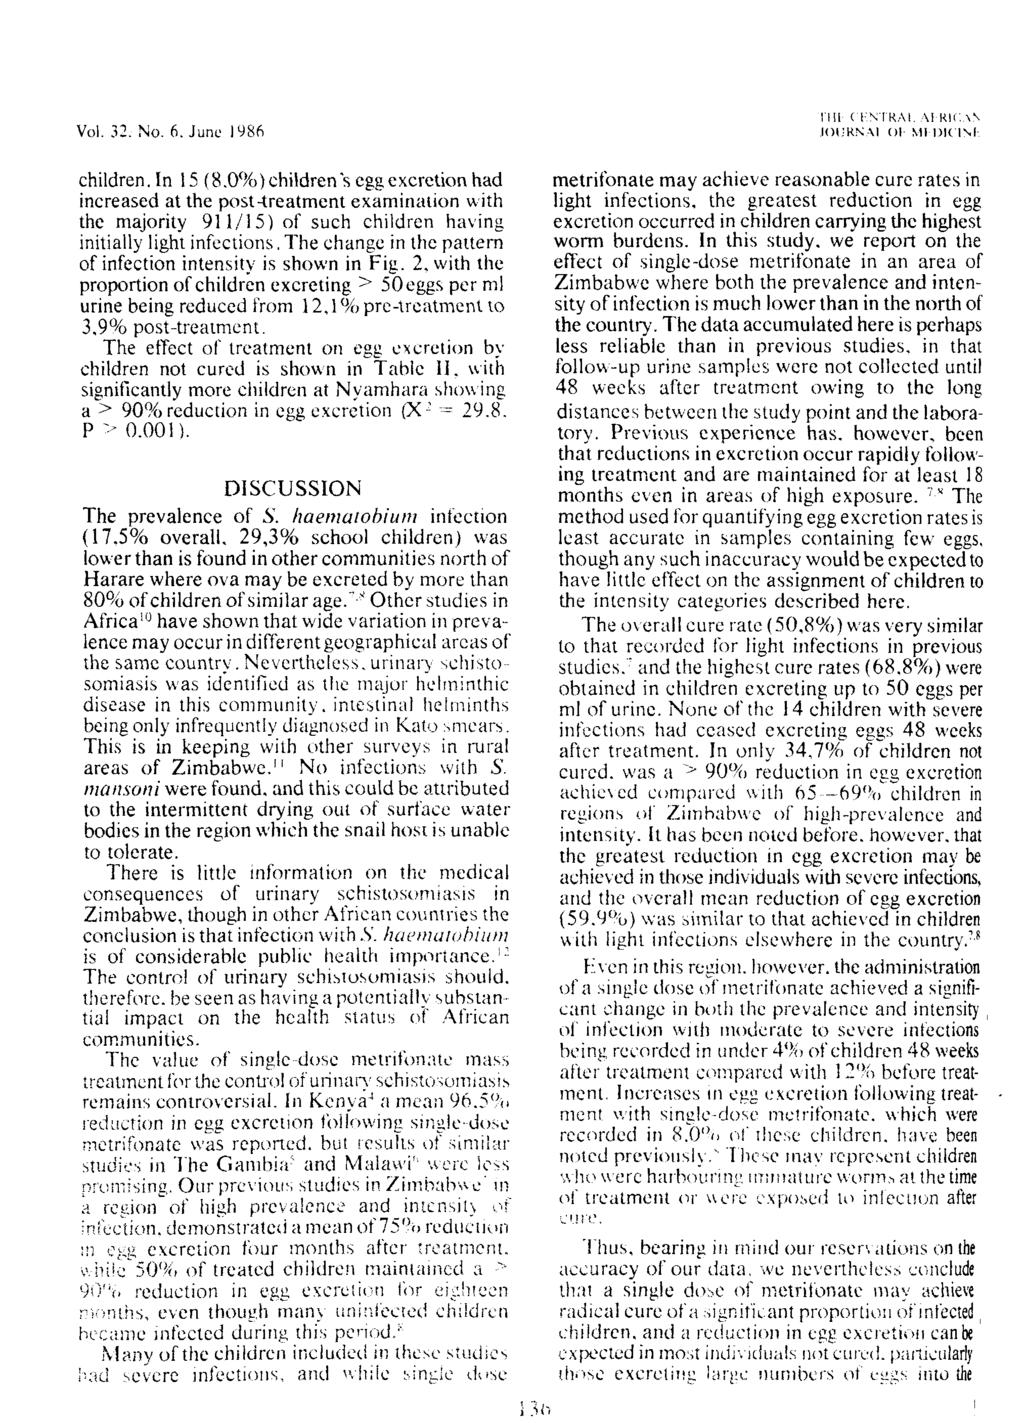 Vol. 32. No. 6. June 1986 children. In 15 (8.0%)children's cggexcretionhad increased at the post-treatment examination with the majority 911/15) of such children having initially light infections.